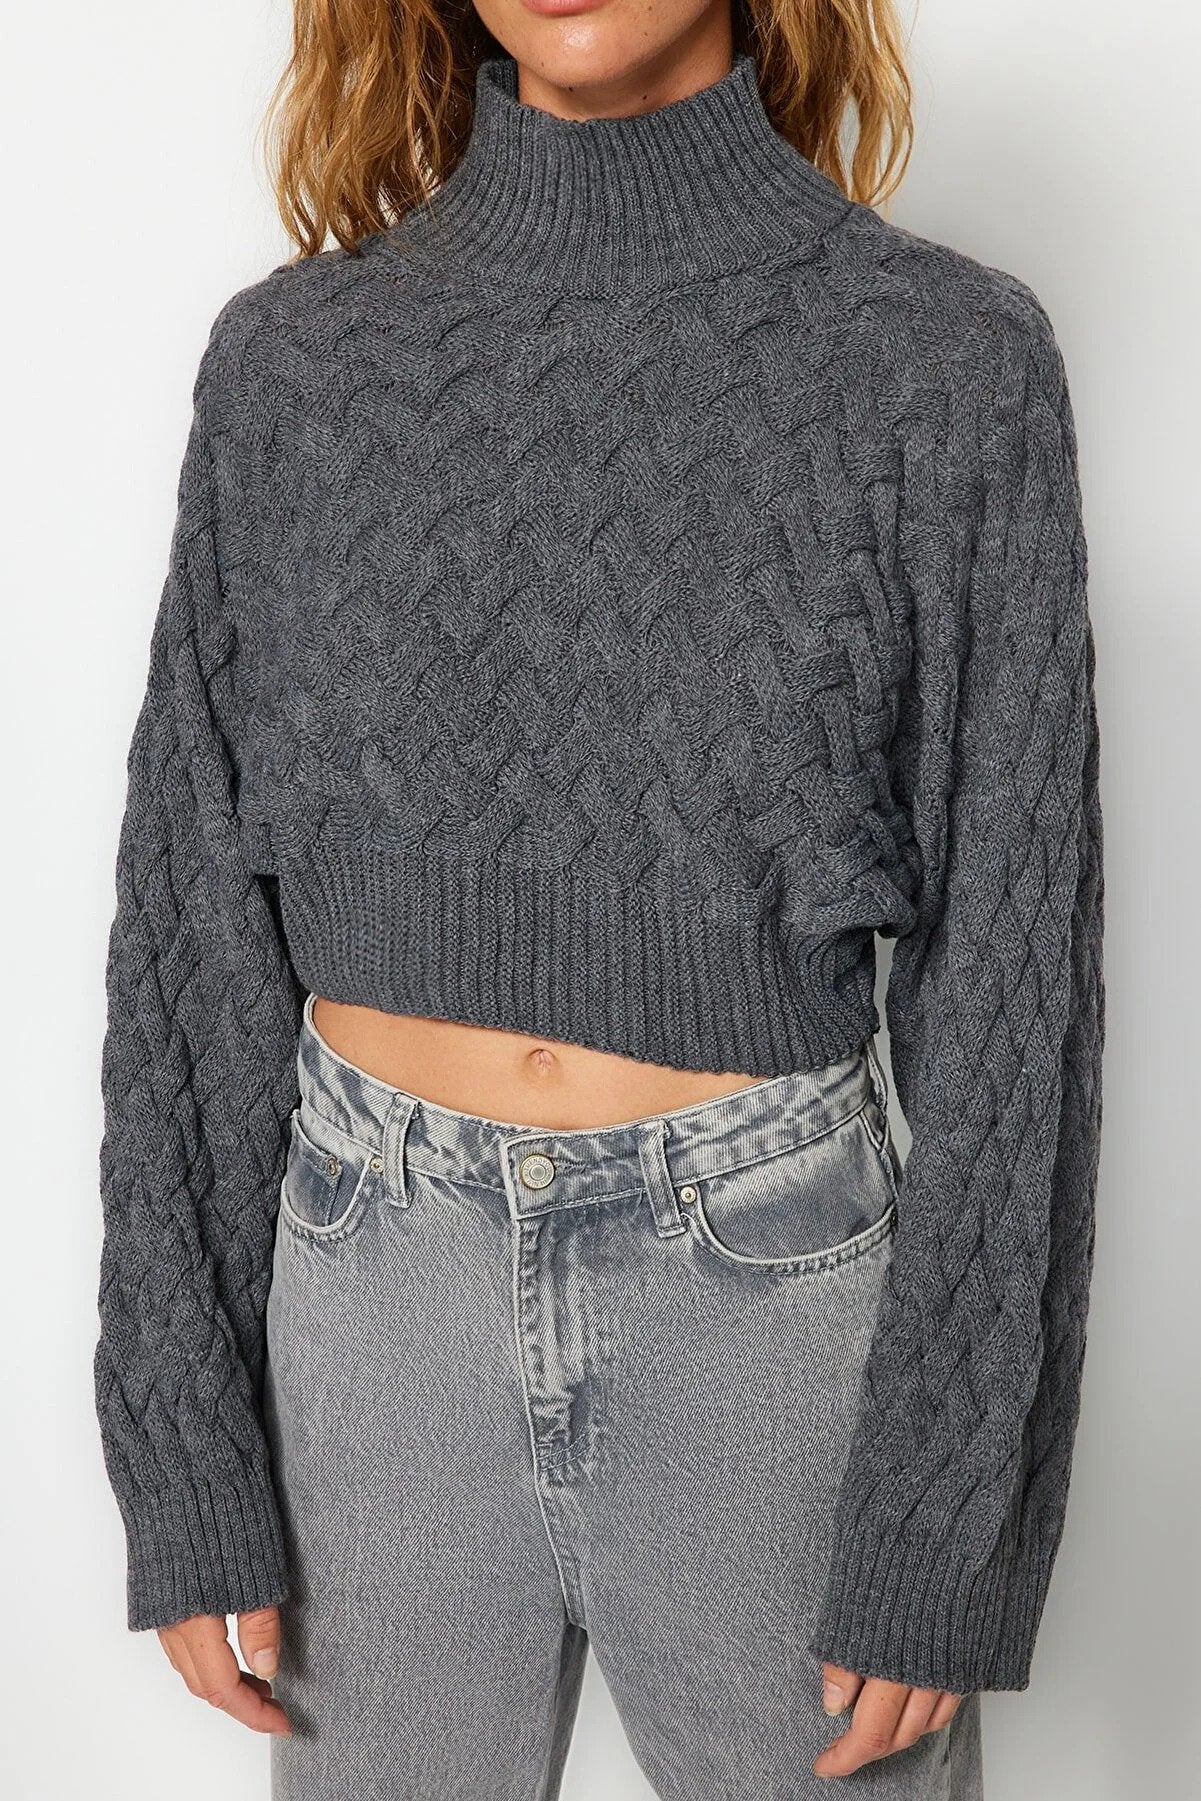 Trendyol Cable Knitted Antrasite Stylish Sweater